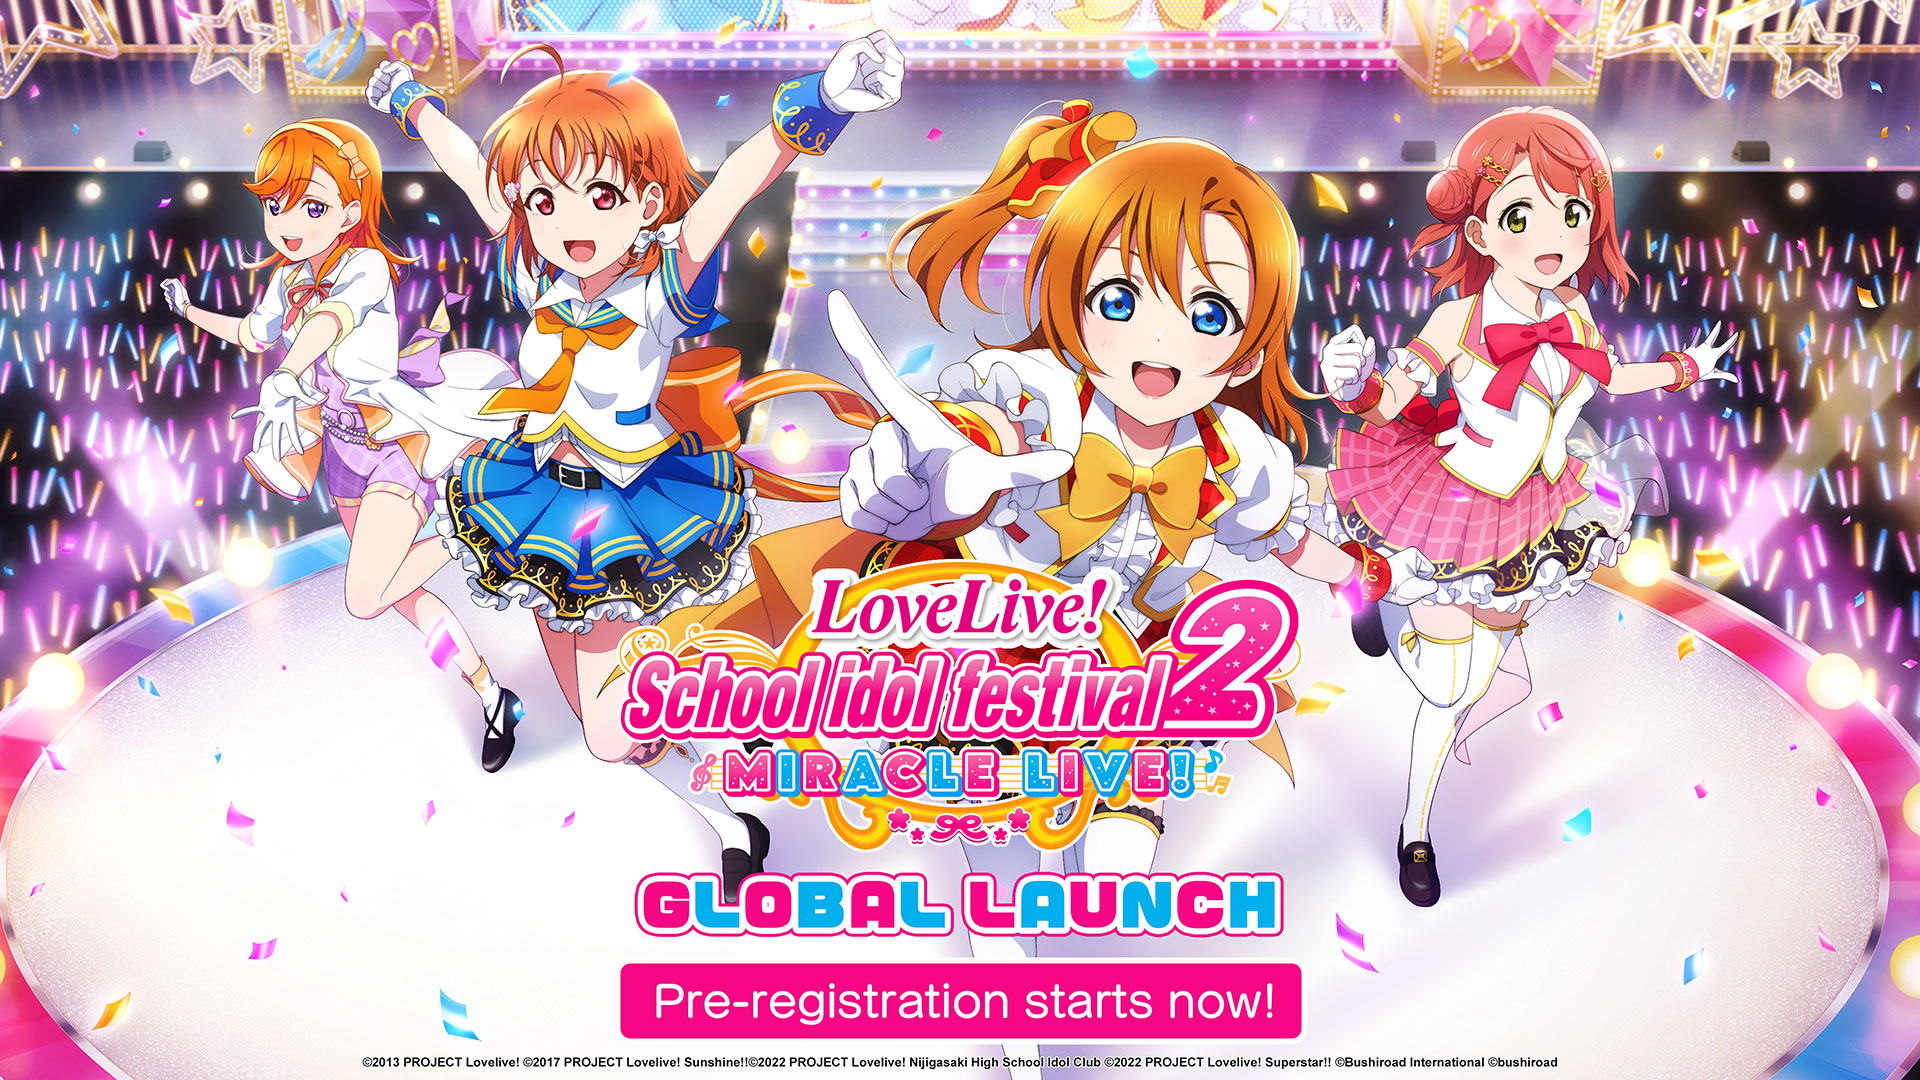 The global version of Love Live! School Idol Festival 2 Miracle Live! launches in February but will end its service in May